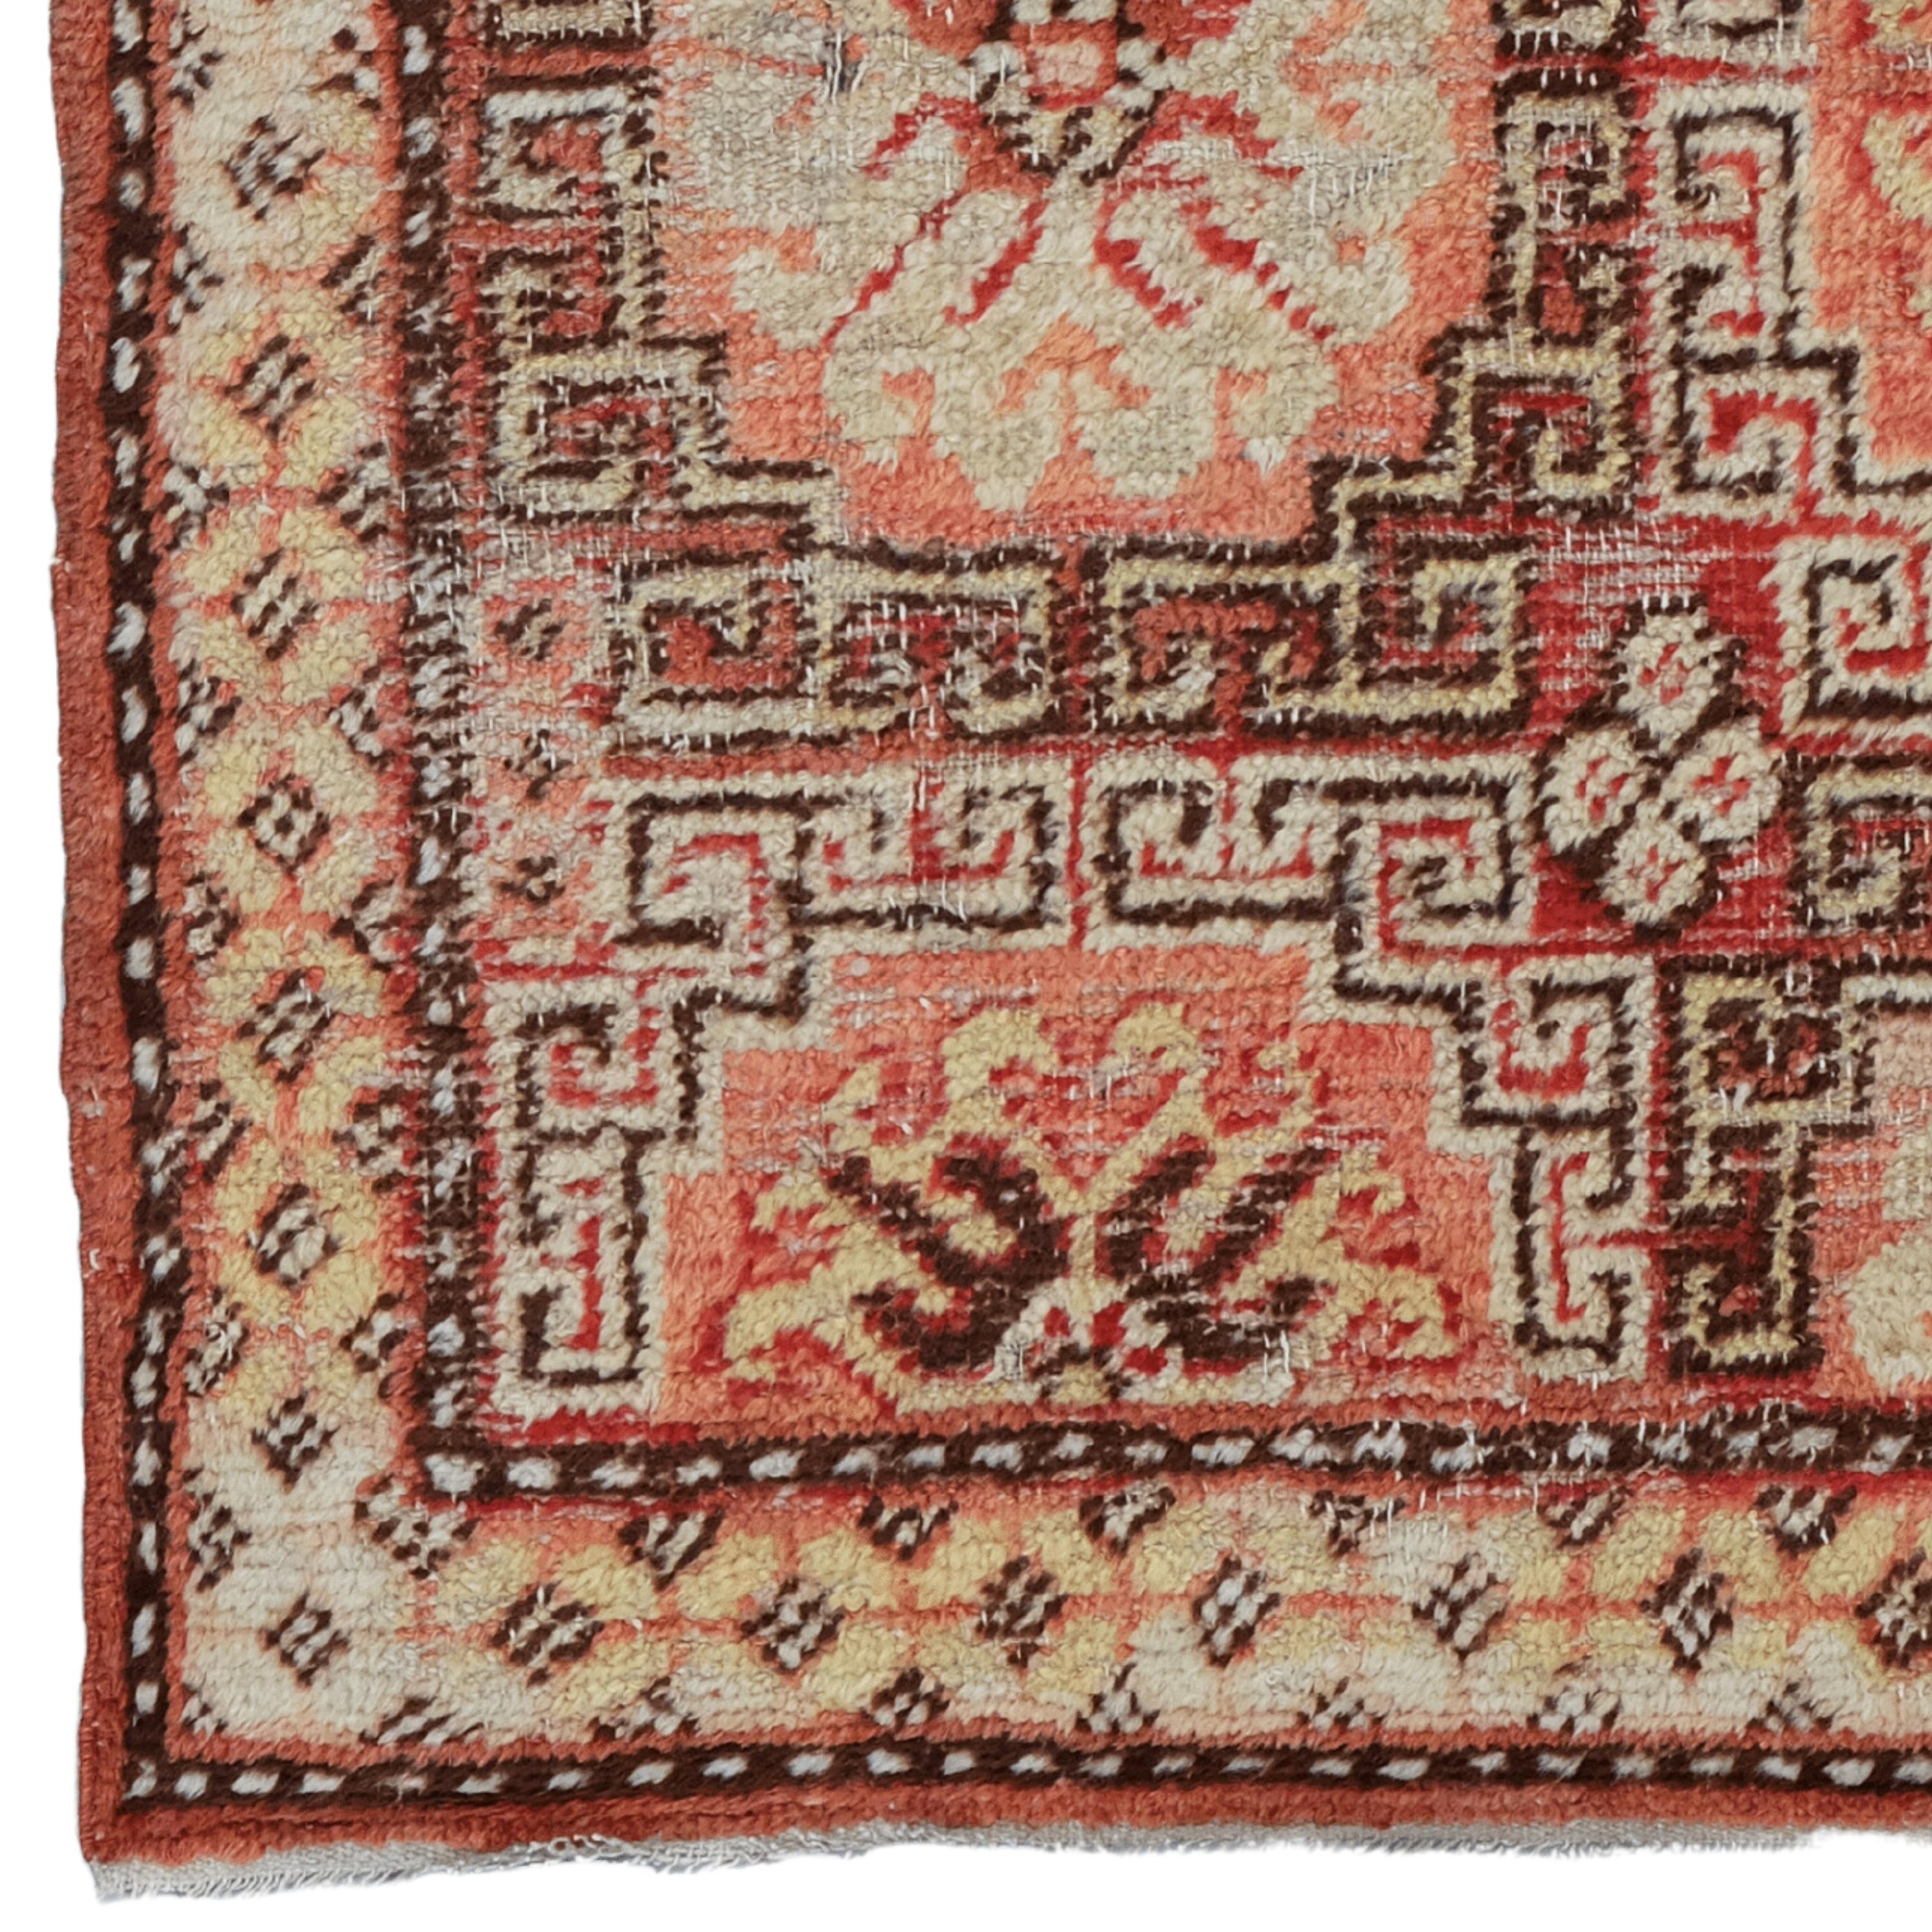 19th Century Khotan Rug - Handwoven Turkish Rug

This elegant 19th-century Khotan rug adds nobility to any space with its historical texture and sophisticated design. This handmade work, measuring 77x97 cm, has been designed to maintain its